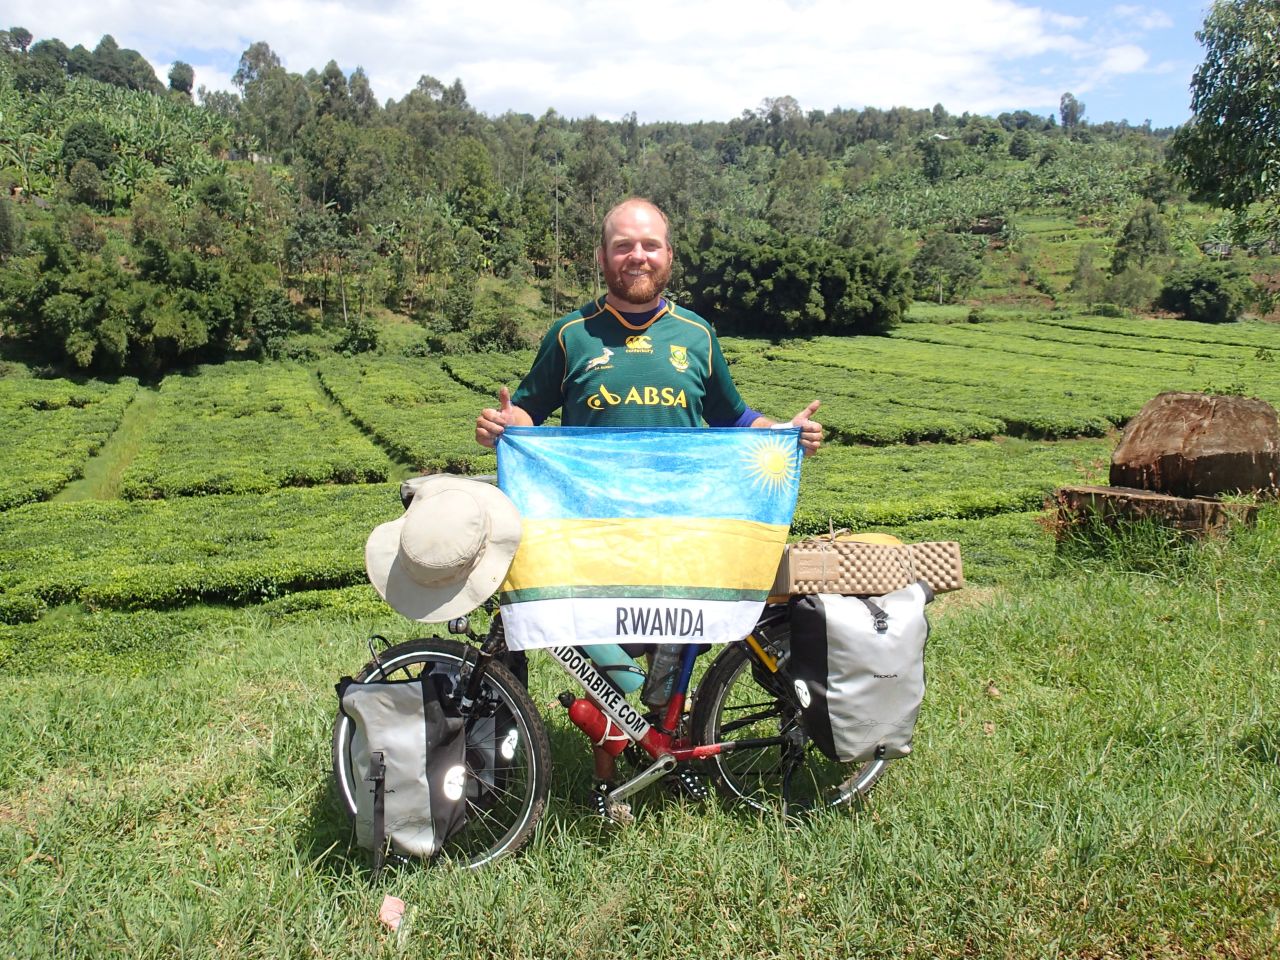 Rutland's diet ranged between street food consisting of meat and rice, to packet noodles and biscuits he carried on his bicycle. In places like Rwanda, mangoes and avocados were "dripping off the trees."